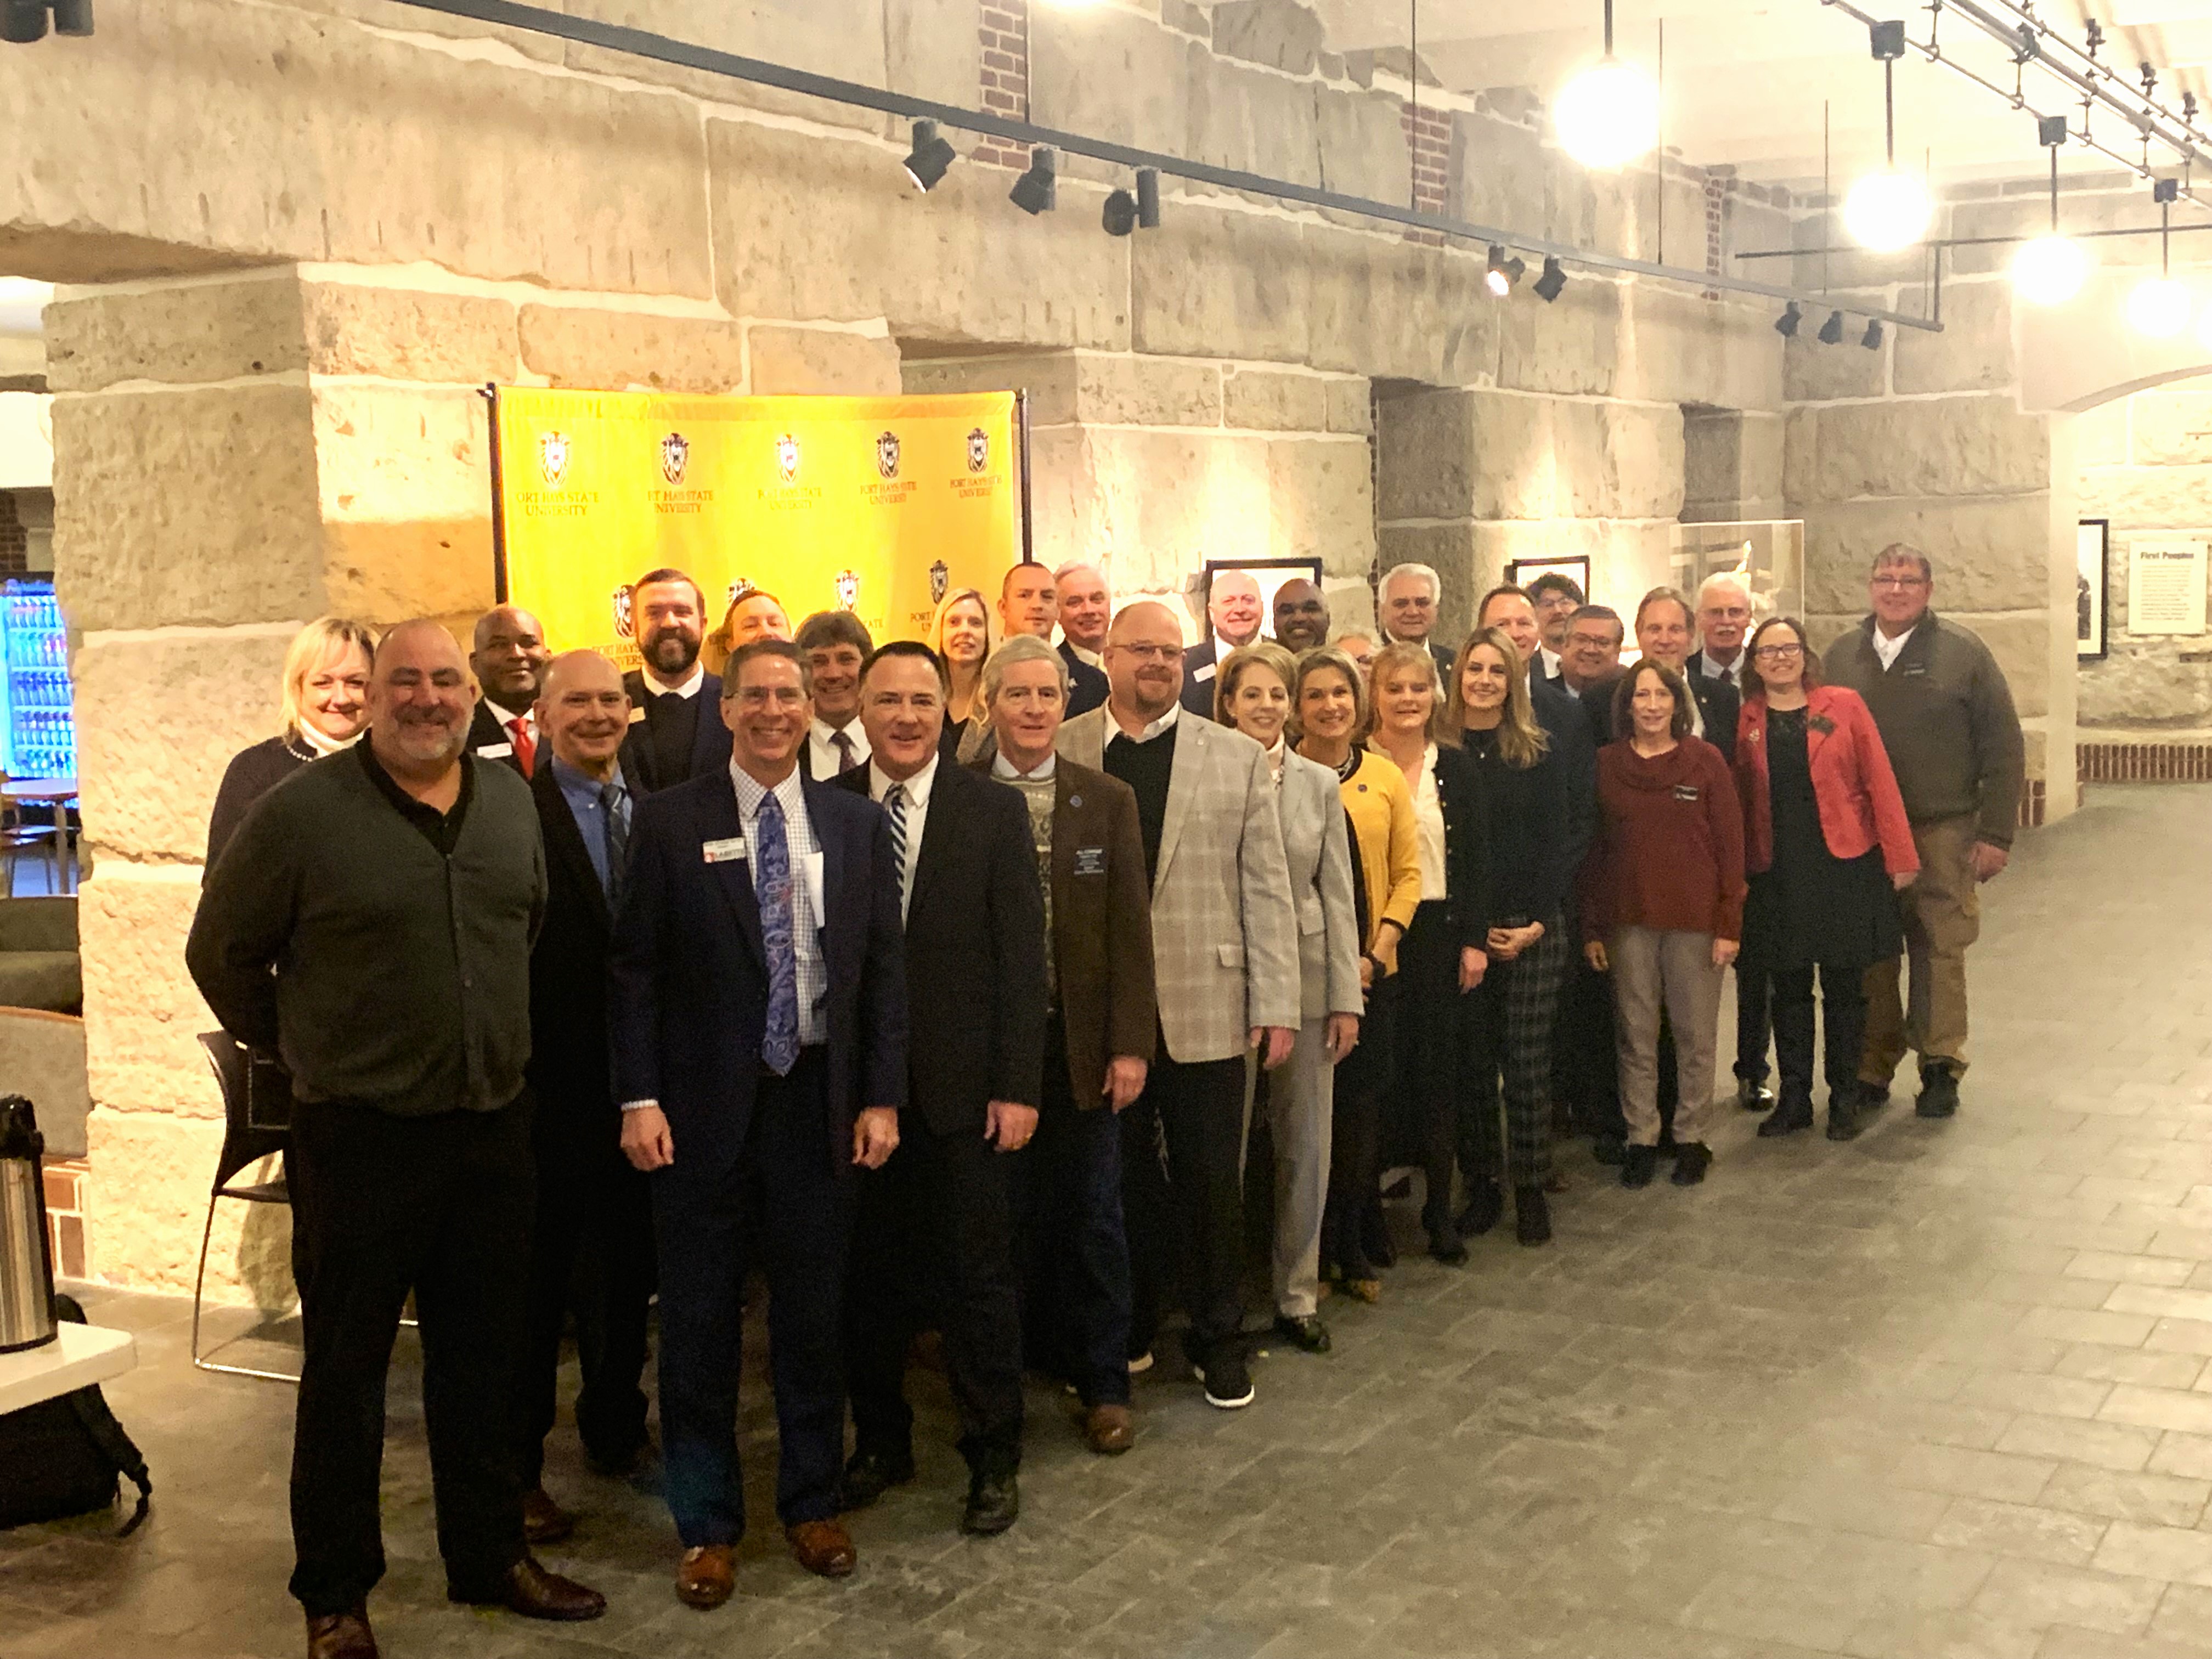 Presidents of FHSU and Kansas community colleges, members of the Kansas Legislature, and administrators and faculty from FHSU and Kansas community colleges.